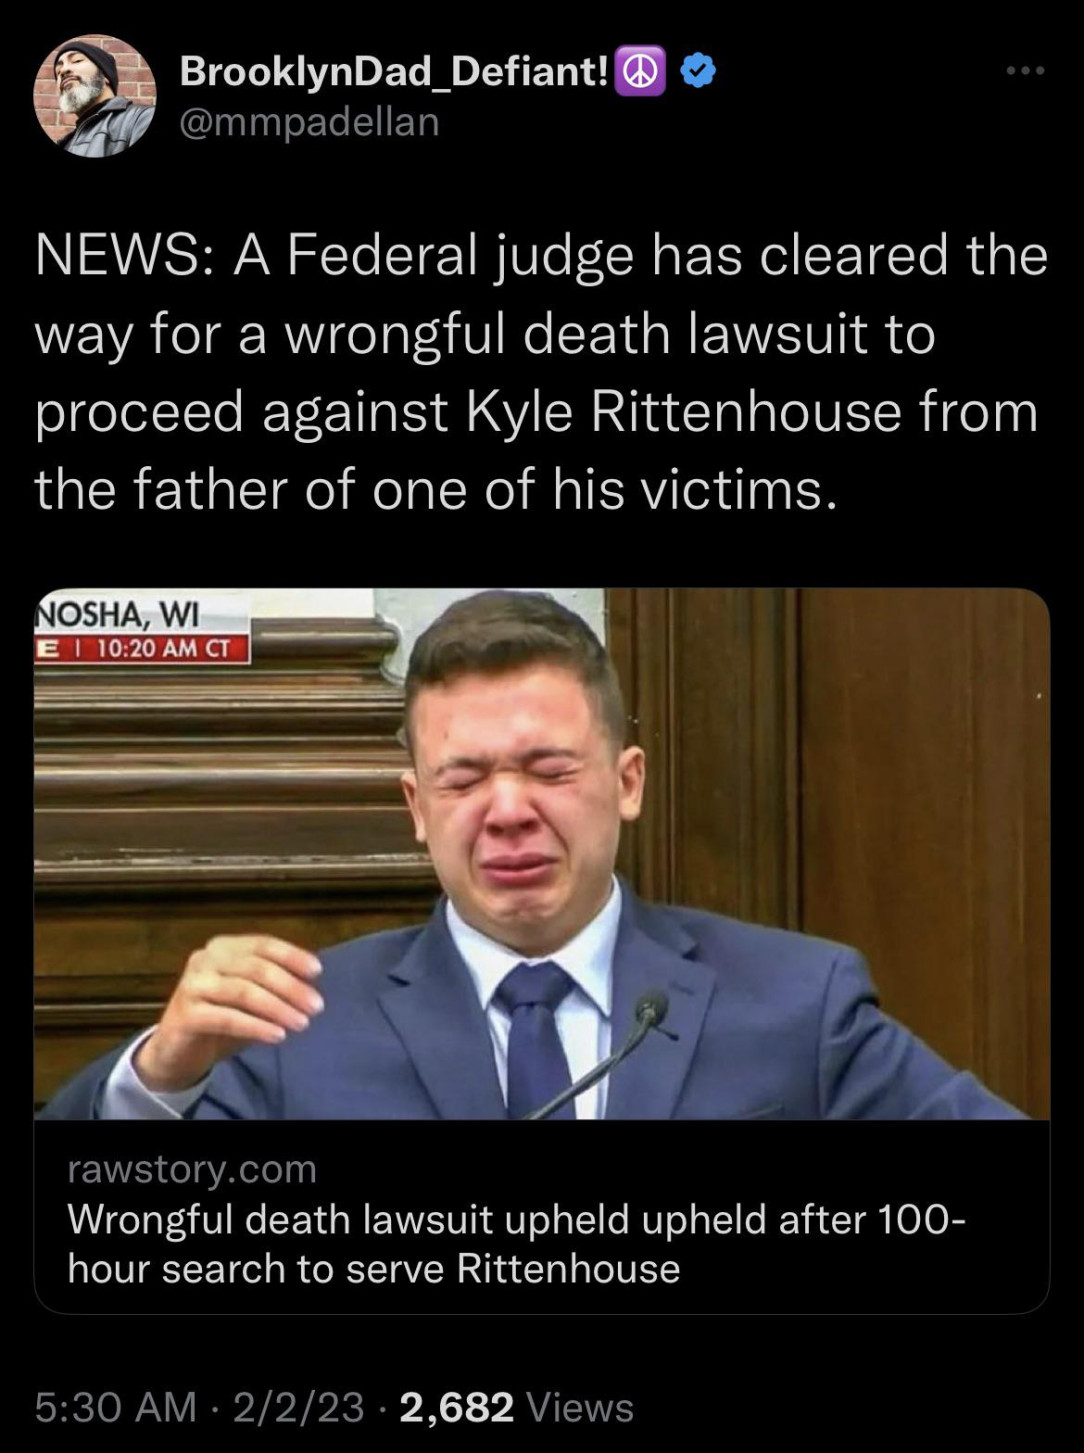 Kyle Rittenhouse will be sued by the father of one of his victims…